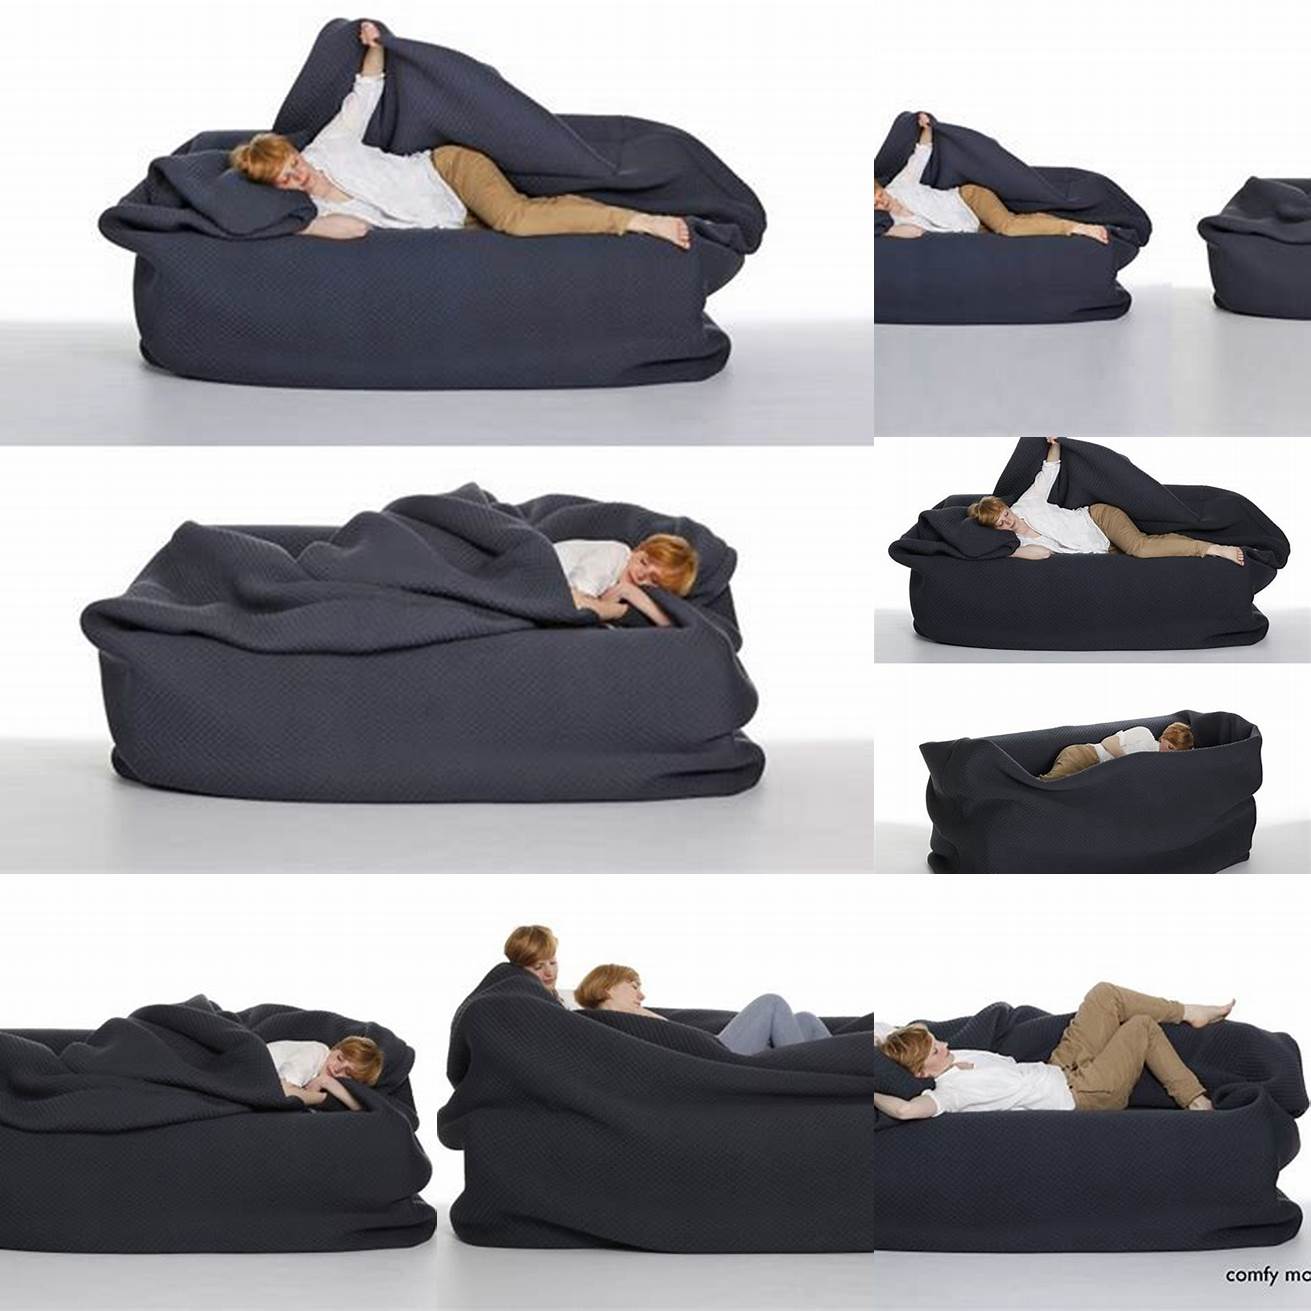 Image of the Bean Bag Bed with Built In Blanket being used outdoors